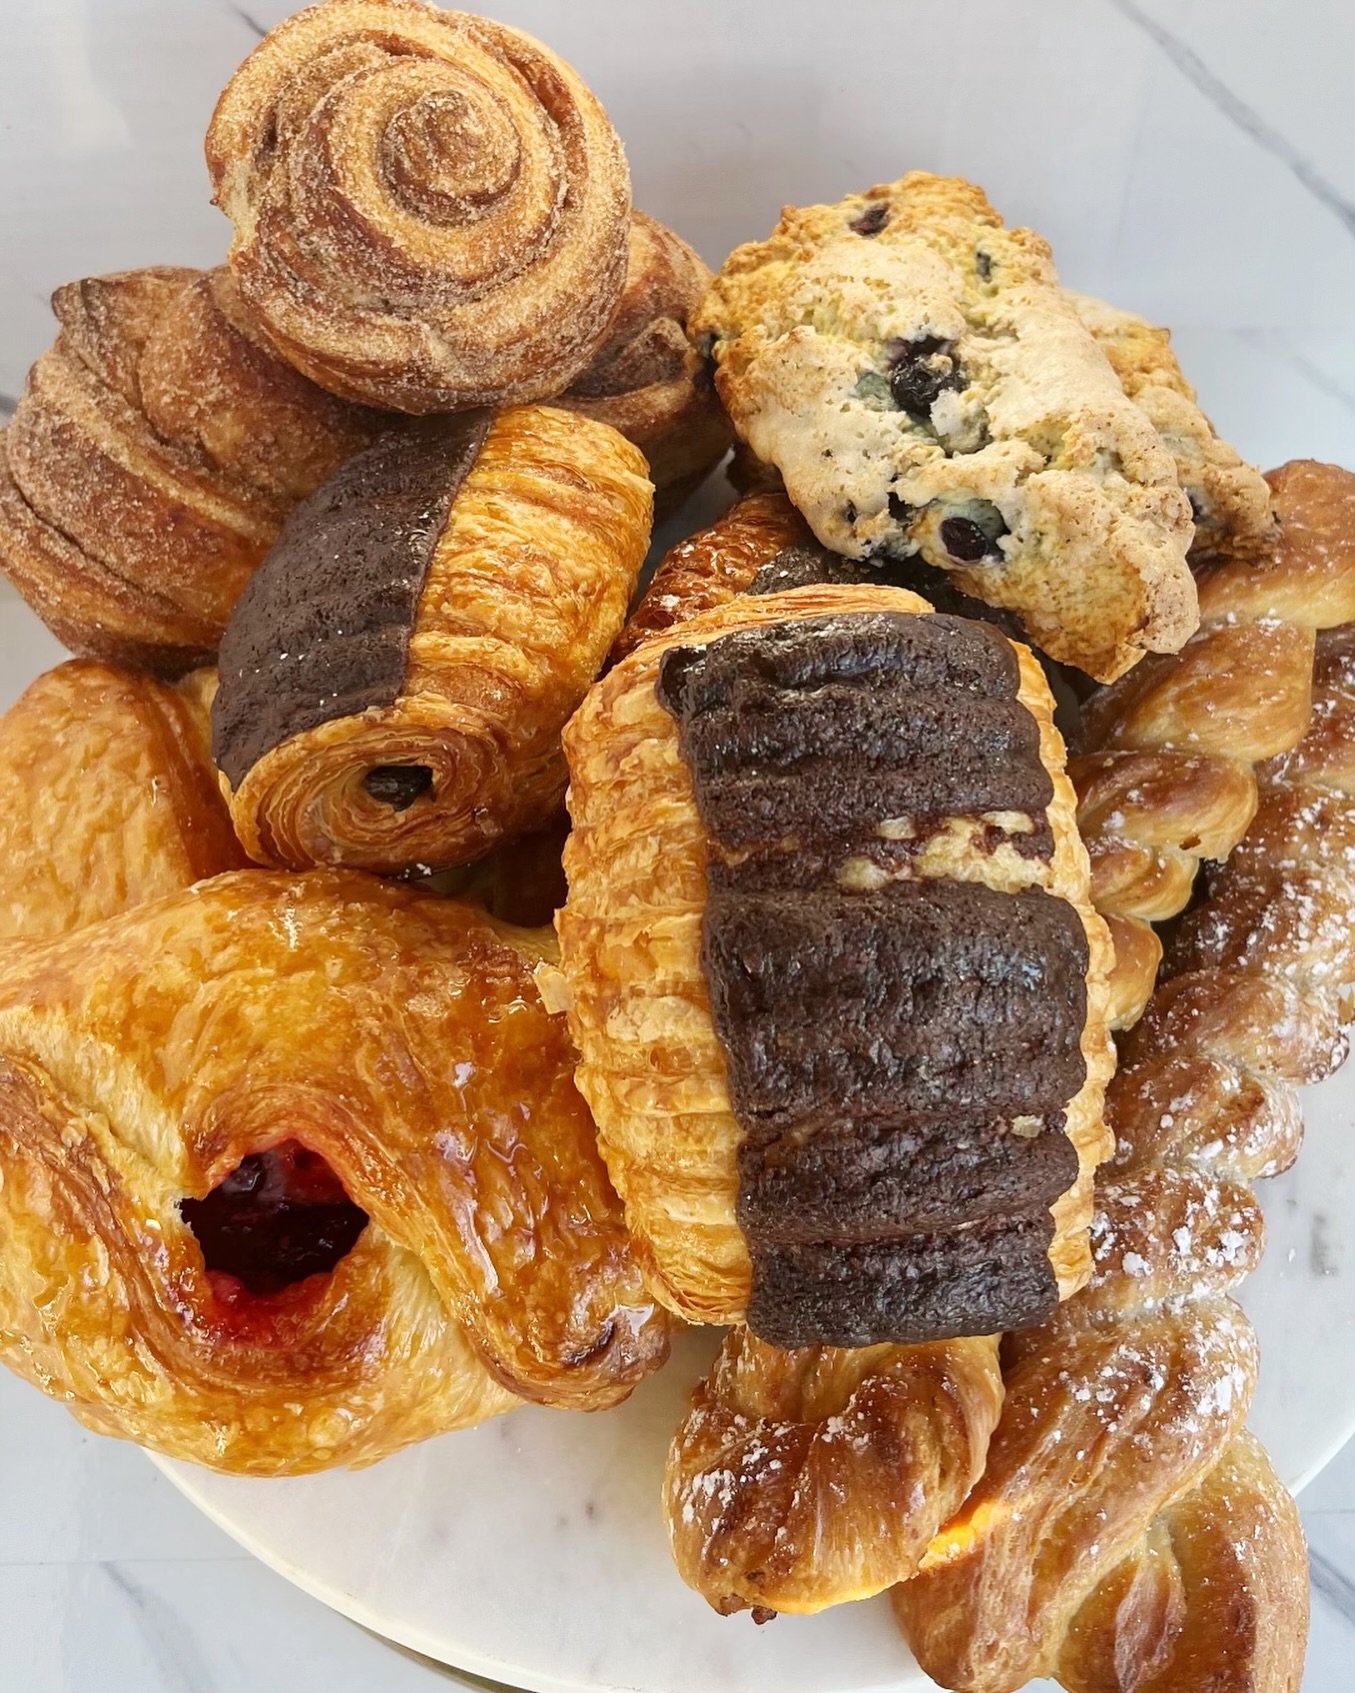 You have 4️⃣ more days to pre-order for Mother&rsquo;s Day!!! Order today before we sell out - Link is in our bio ⬆️ 

This is our Pastry Box (12)
3 all day buns, 2 raspberry cheese croissants, 2 pecan twists, 3 chocolatines, 2 scones du jour $46 
Th